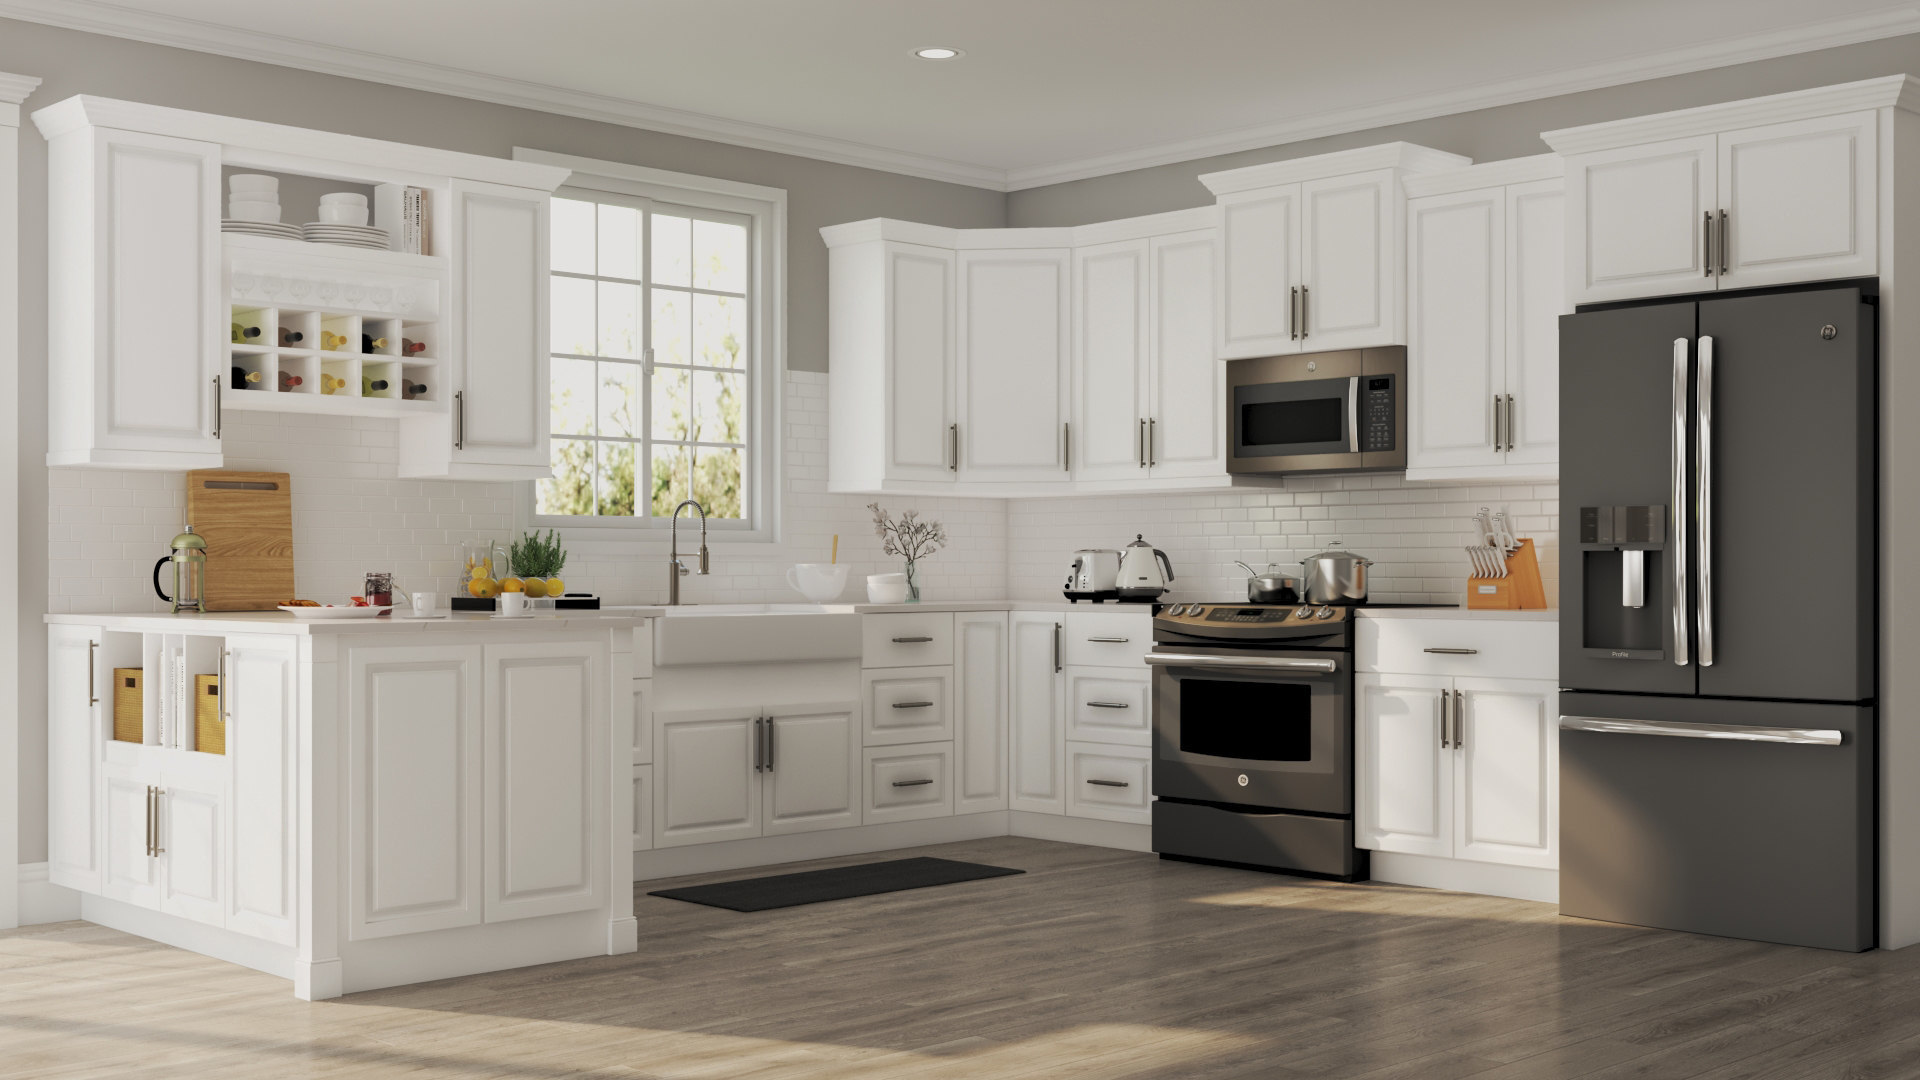 Minimalist White Kitchen Wall Cabinet Home Depot with Simple Decor